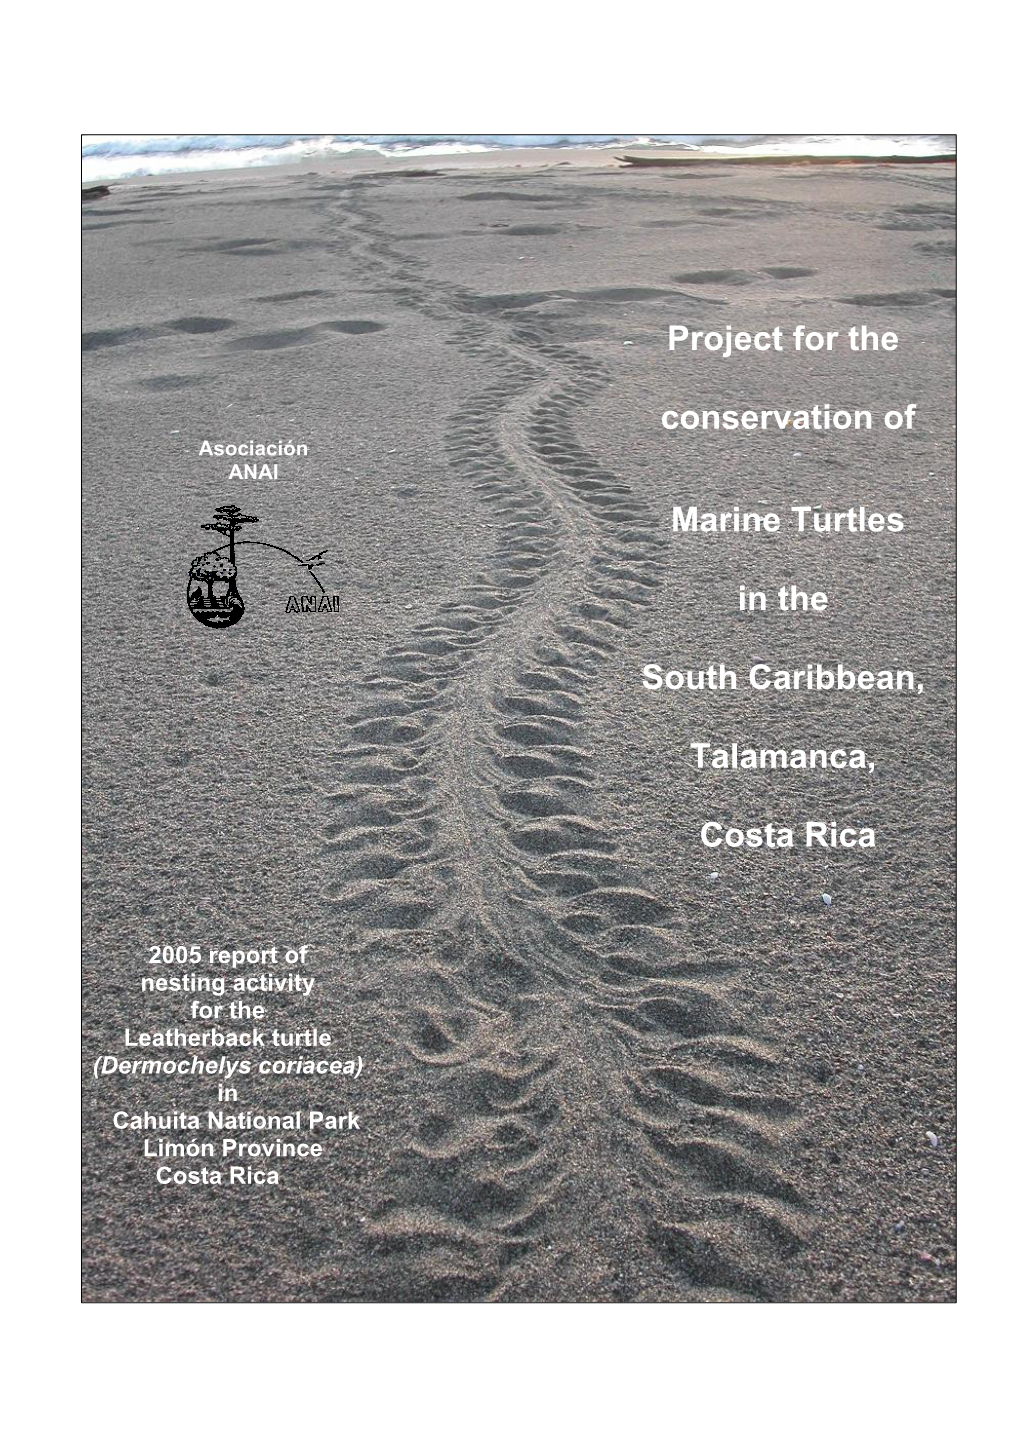 Project for the Conservation of Marine Turtles in the South Caribbean, Talamanca, Costa Rica